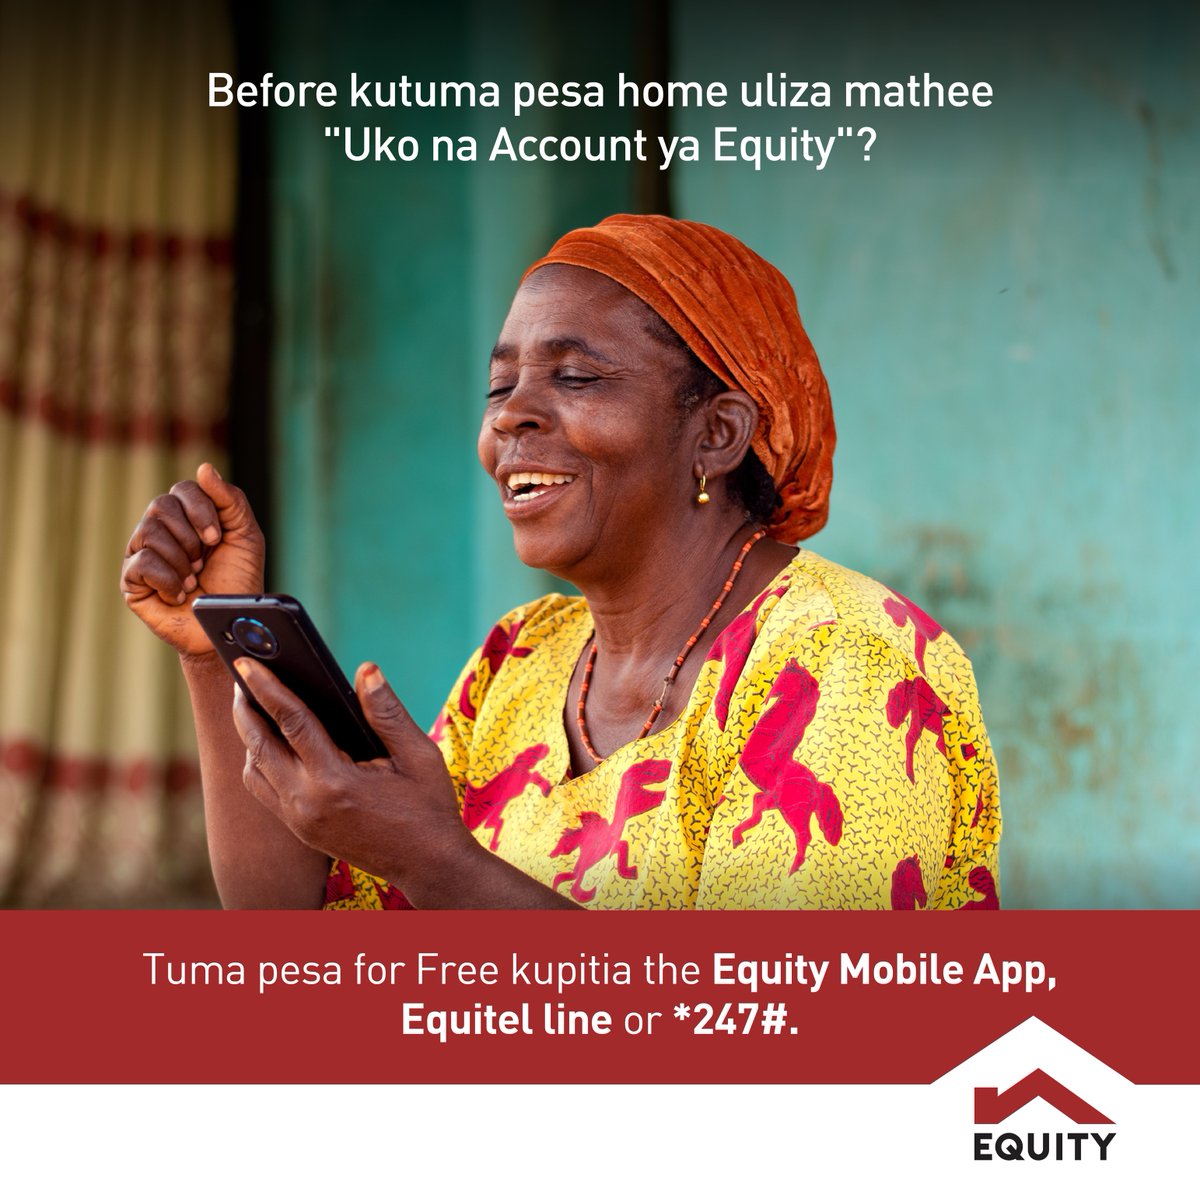 Equity makes it effortless to send money for FREE, ensuring you can save some pennies hapa na pale to sort other expenses like groceries, fare, dinner & much more. Kabla ya kutuma pesa uliza 'Uko na Account ya Equity?' and save some money #KutumaPesaNiFREENaEquity #SavewithEquity